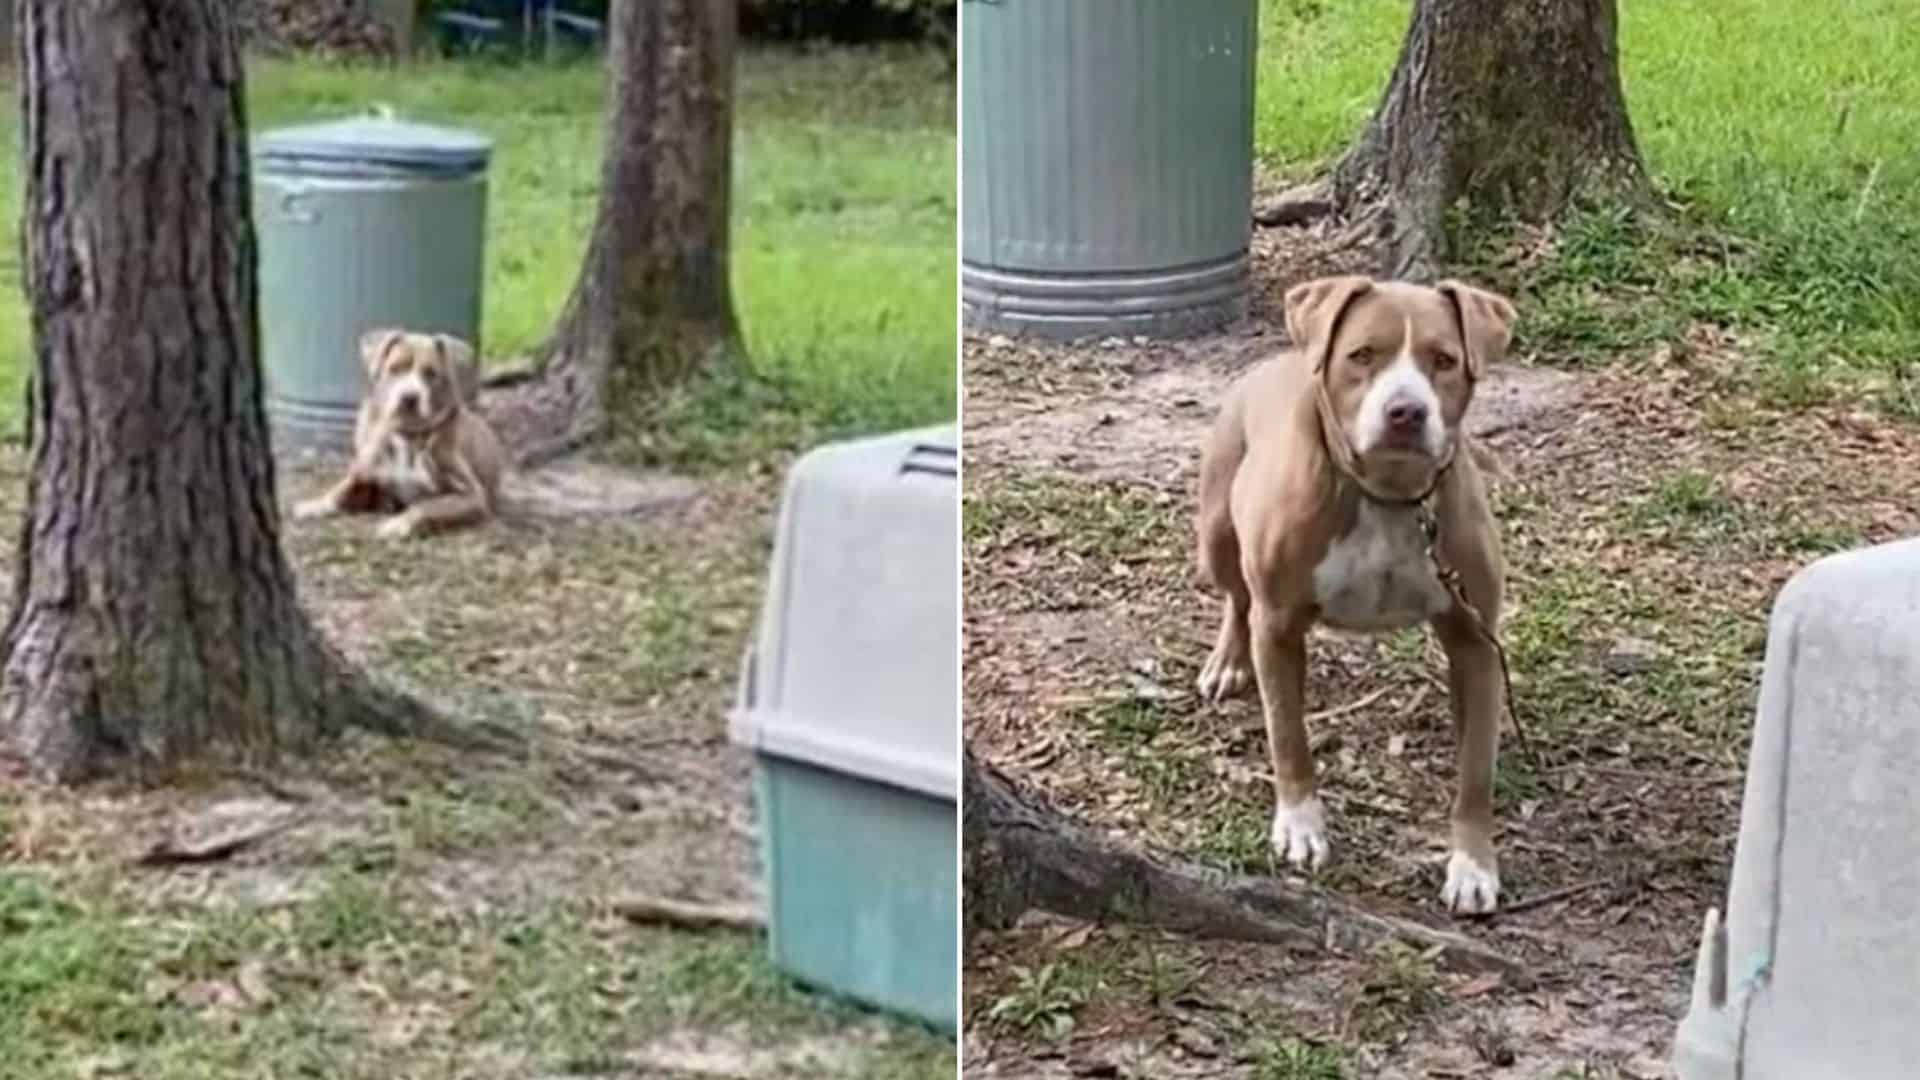 Family Discovers A Dog Tied Up Next To Their House And Decides To Help